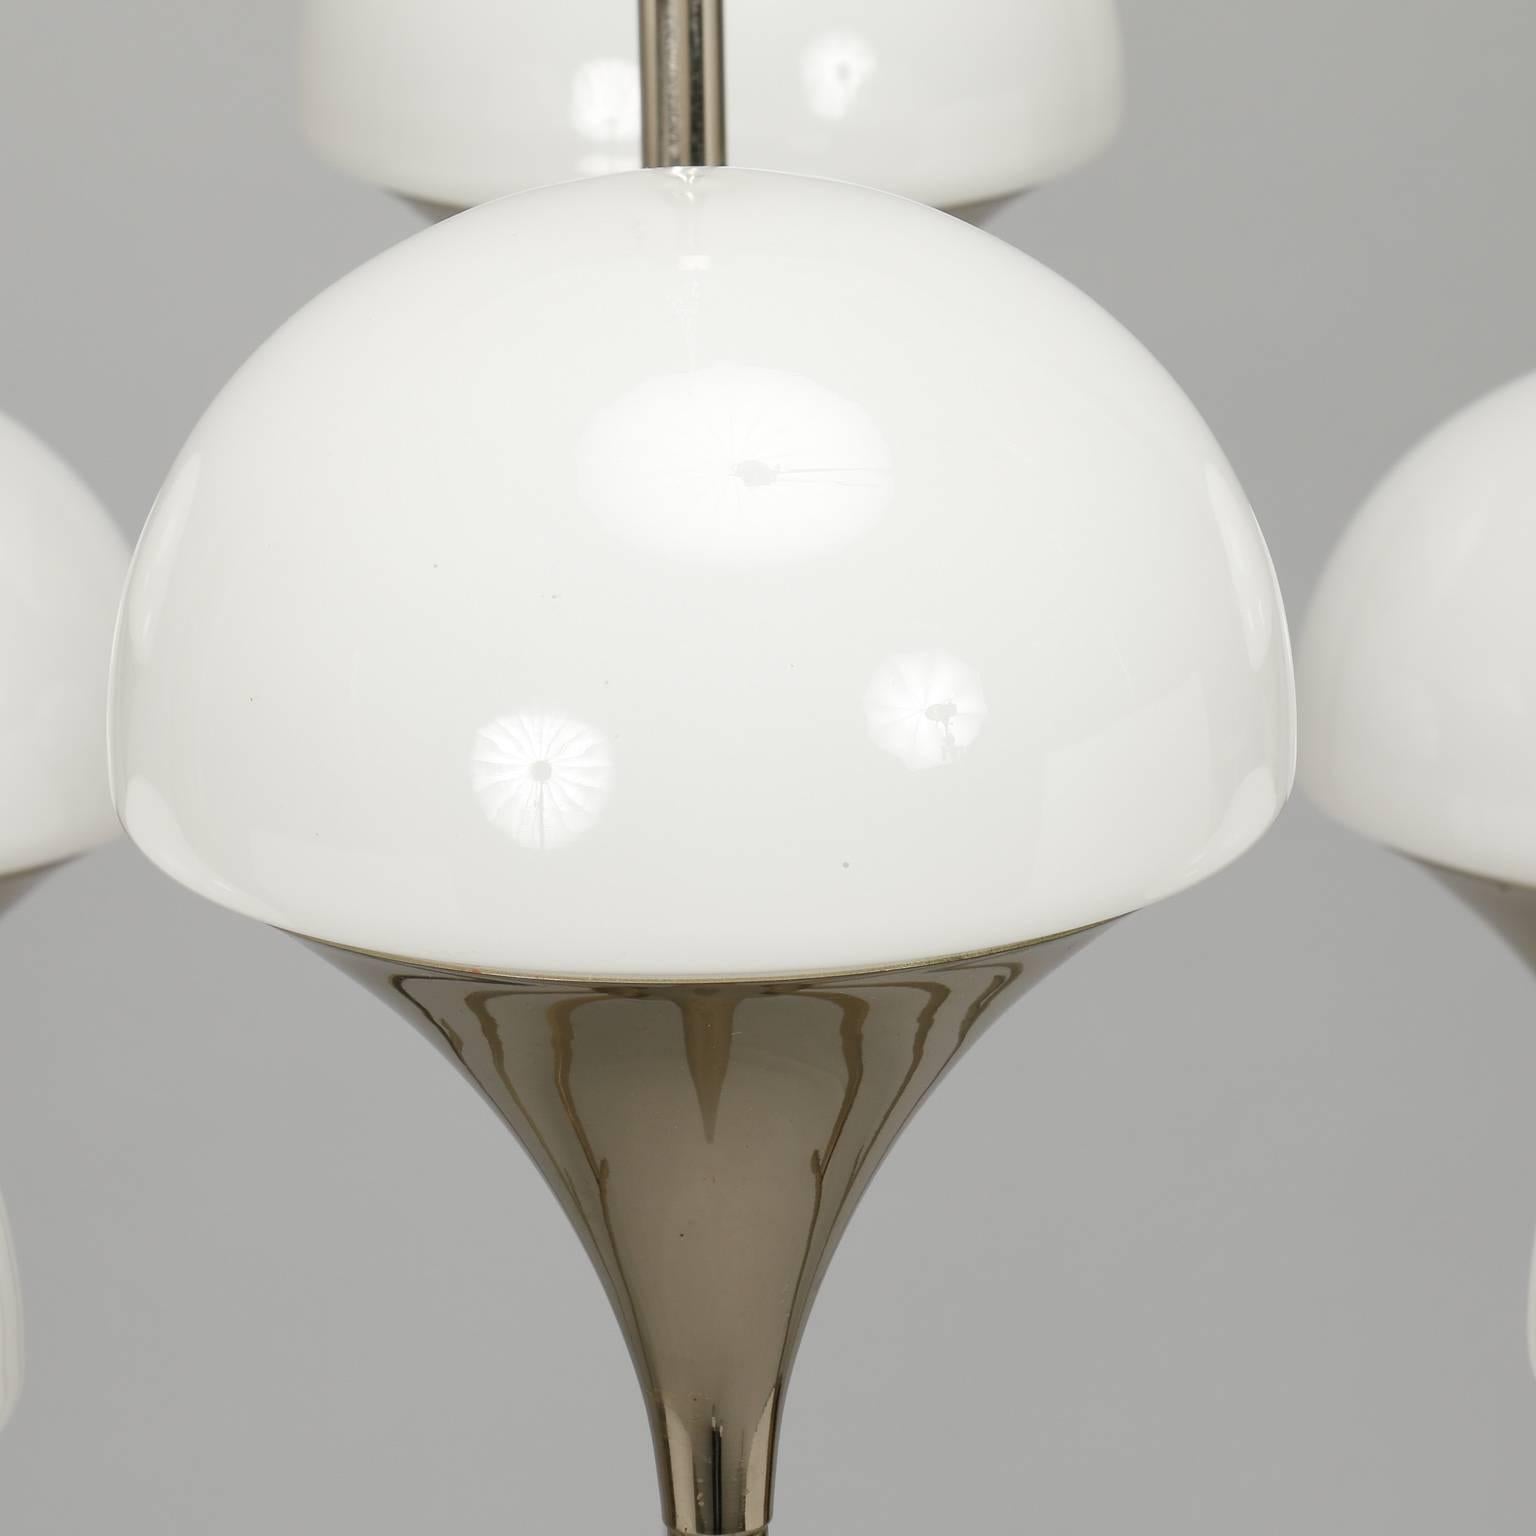 Italian chandelier with a slender chrome frame and eight torchiere style lights topped with white glass domes, circa 1970s. New wiring for US electrical standards. Unknown maker.